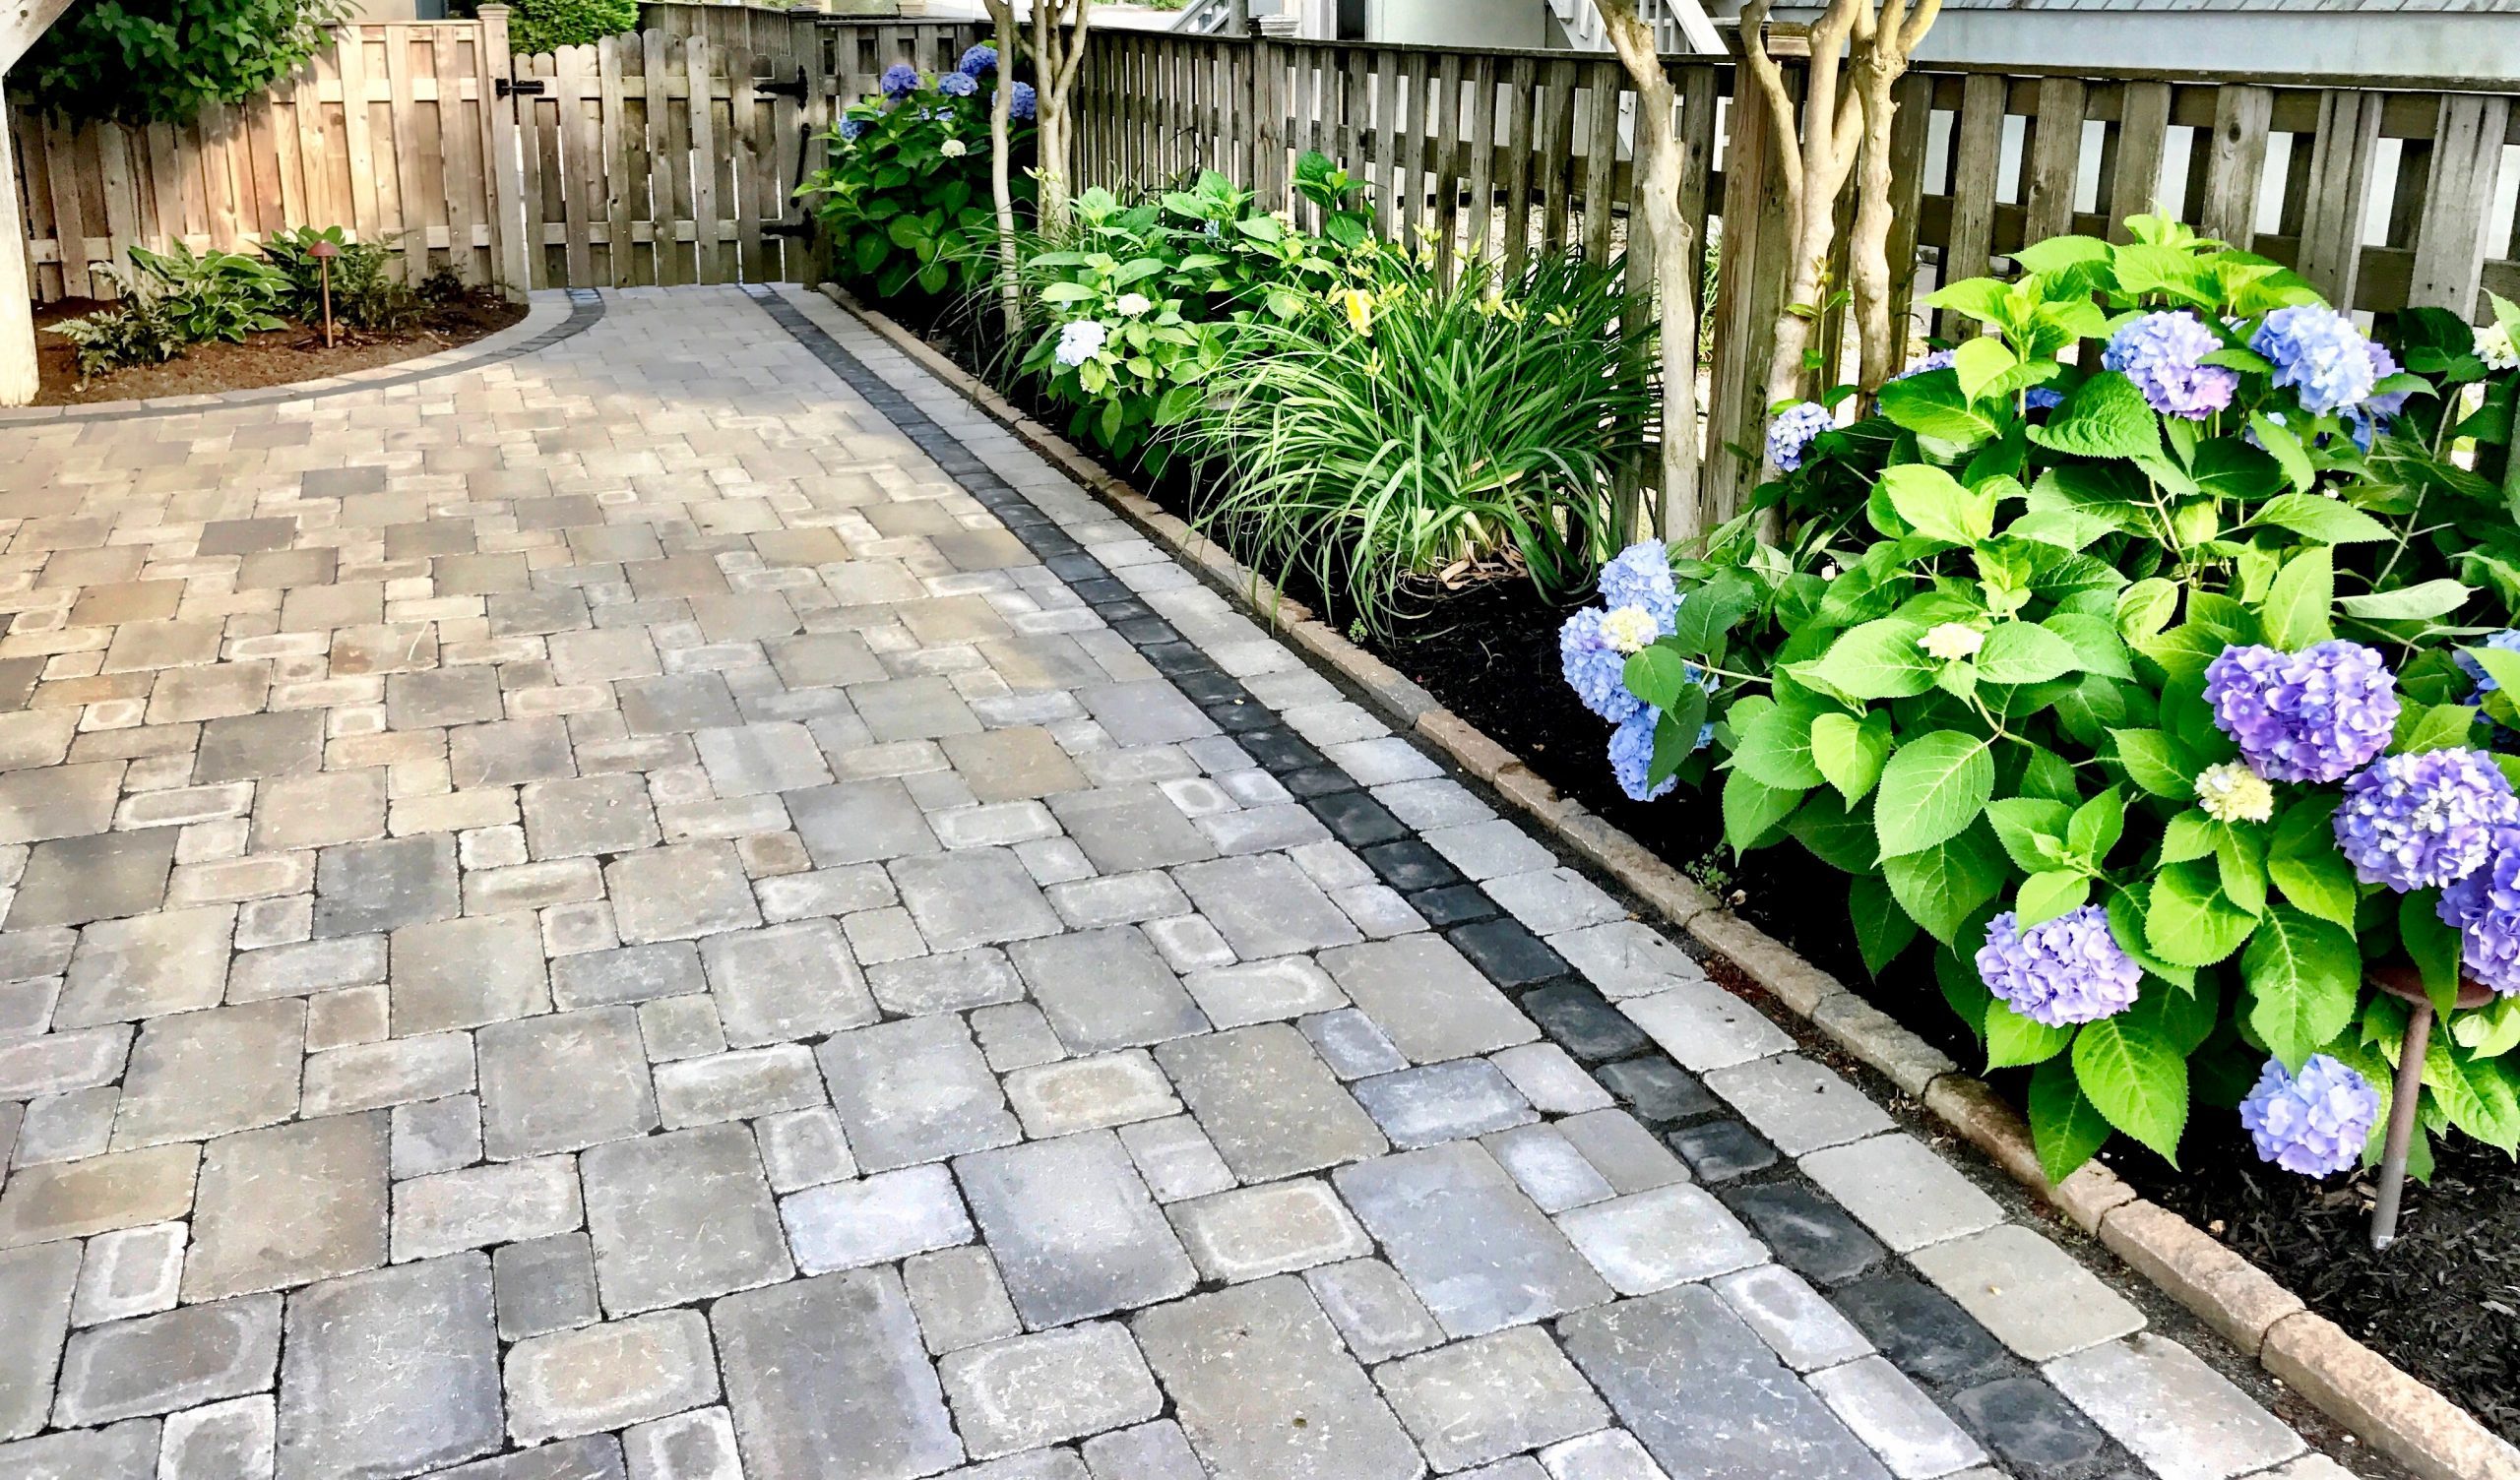 Outdoor Hardscape Design - Why It’s Worth the Investment